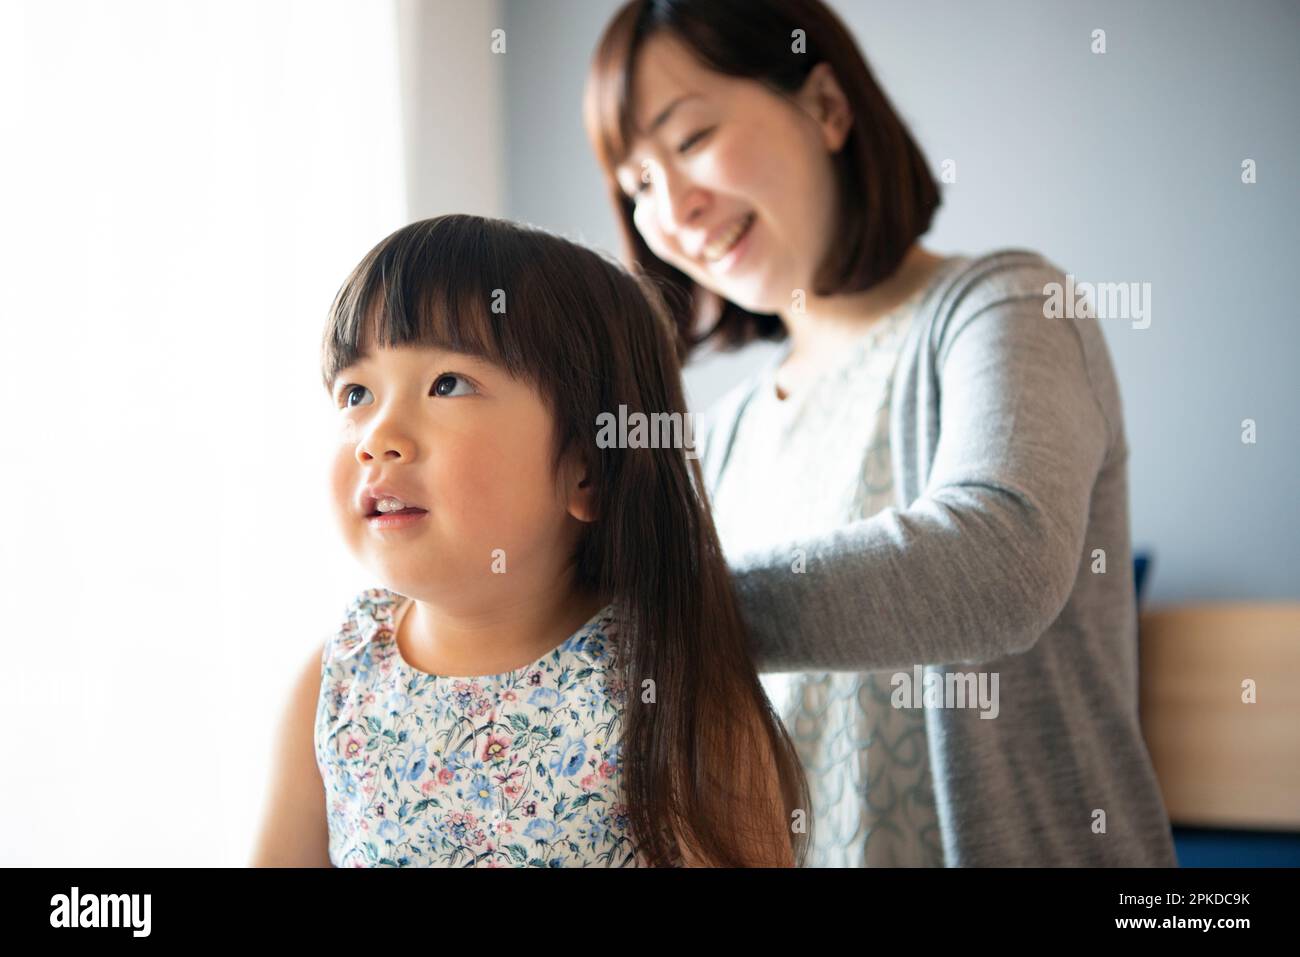 Mother combing girl's hair Stock Photo